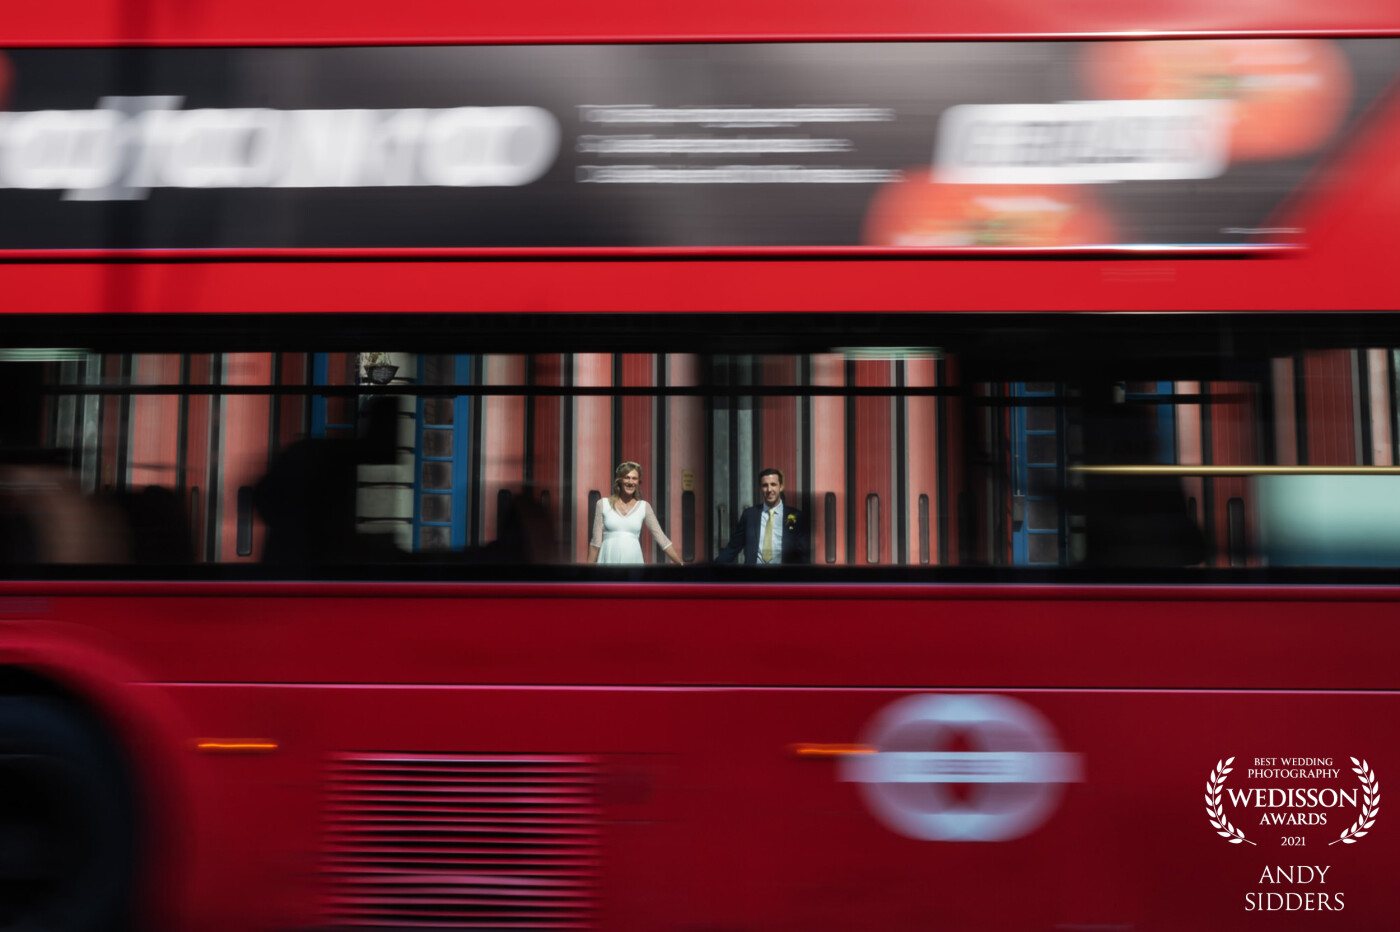 This shot was taken in front of Islington Fire Station after an Islington Town Hall wedding. I posed the couple and shot them using a slow shutter speed to capture the motion blur of the bus as it went past.